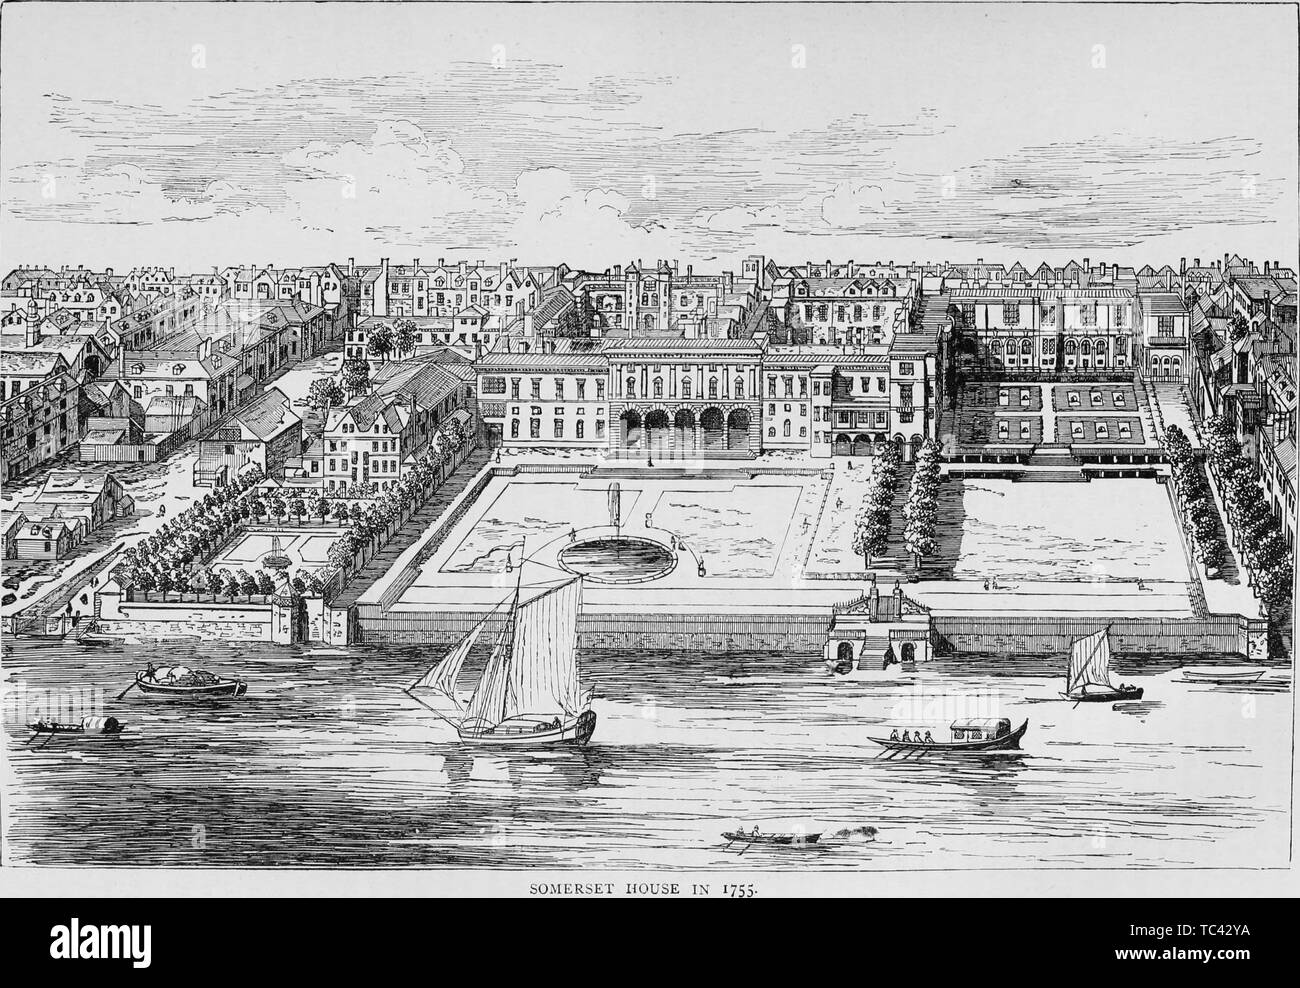 Engraving of the Somerset House, viewed from the Thames River, London, England, from the book 'Old and new London: a narrative of its history, its people, and its places' by Thornbury Walter, 1873. Courtesy Internet Archive. () Stock Photo